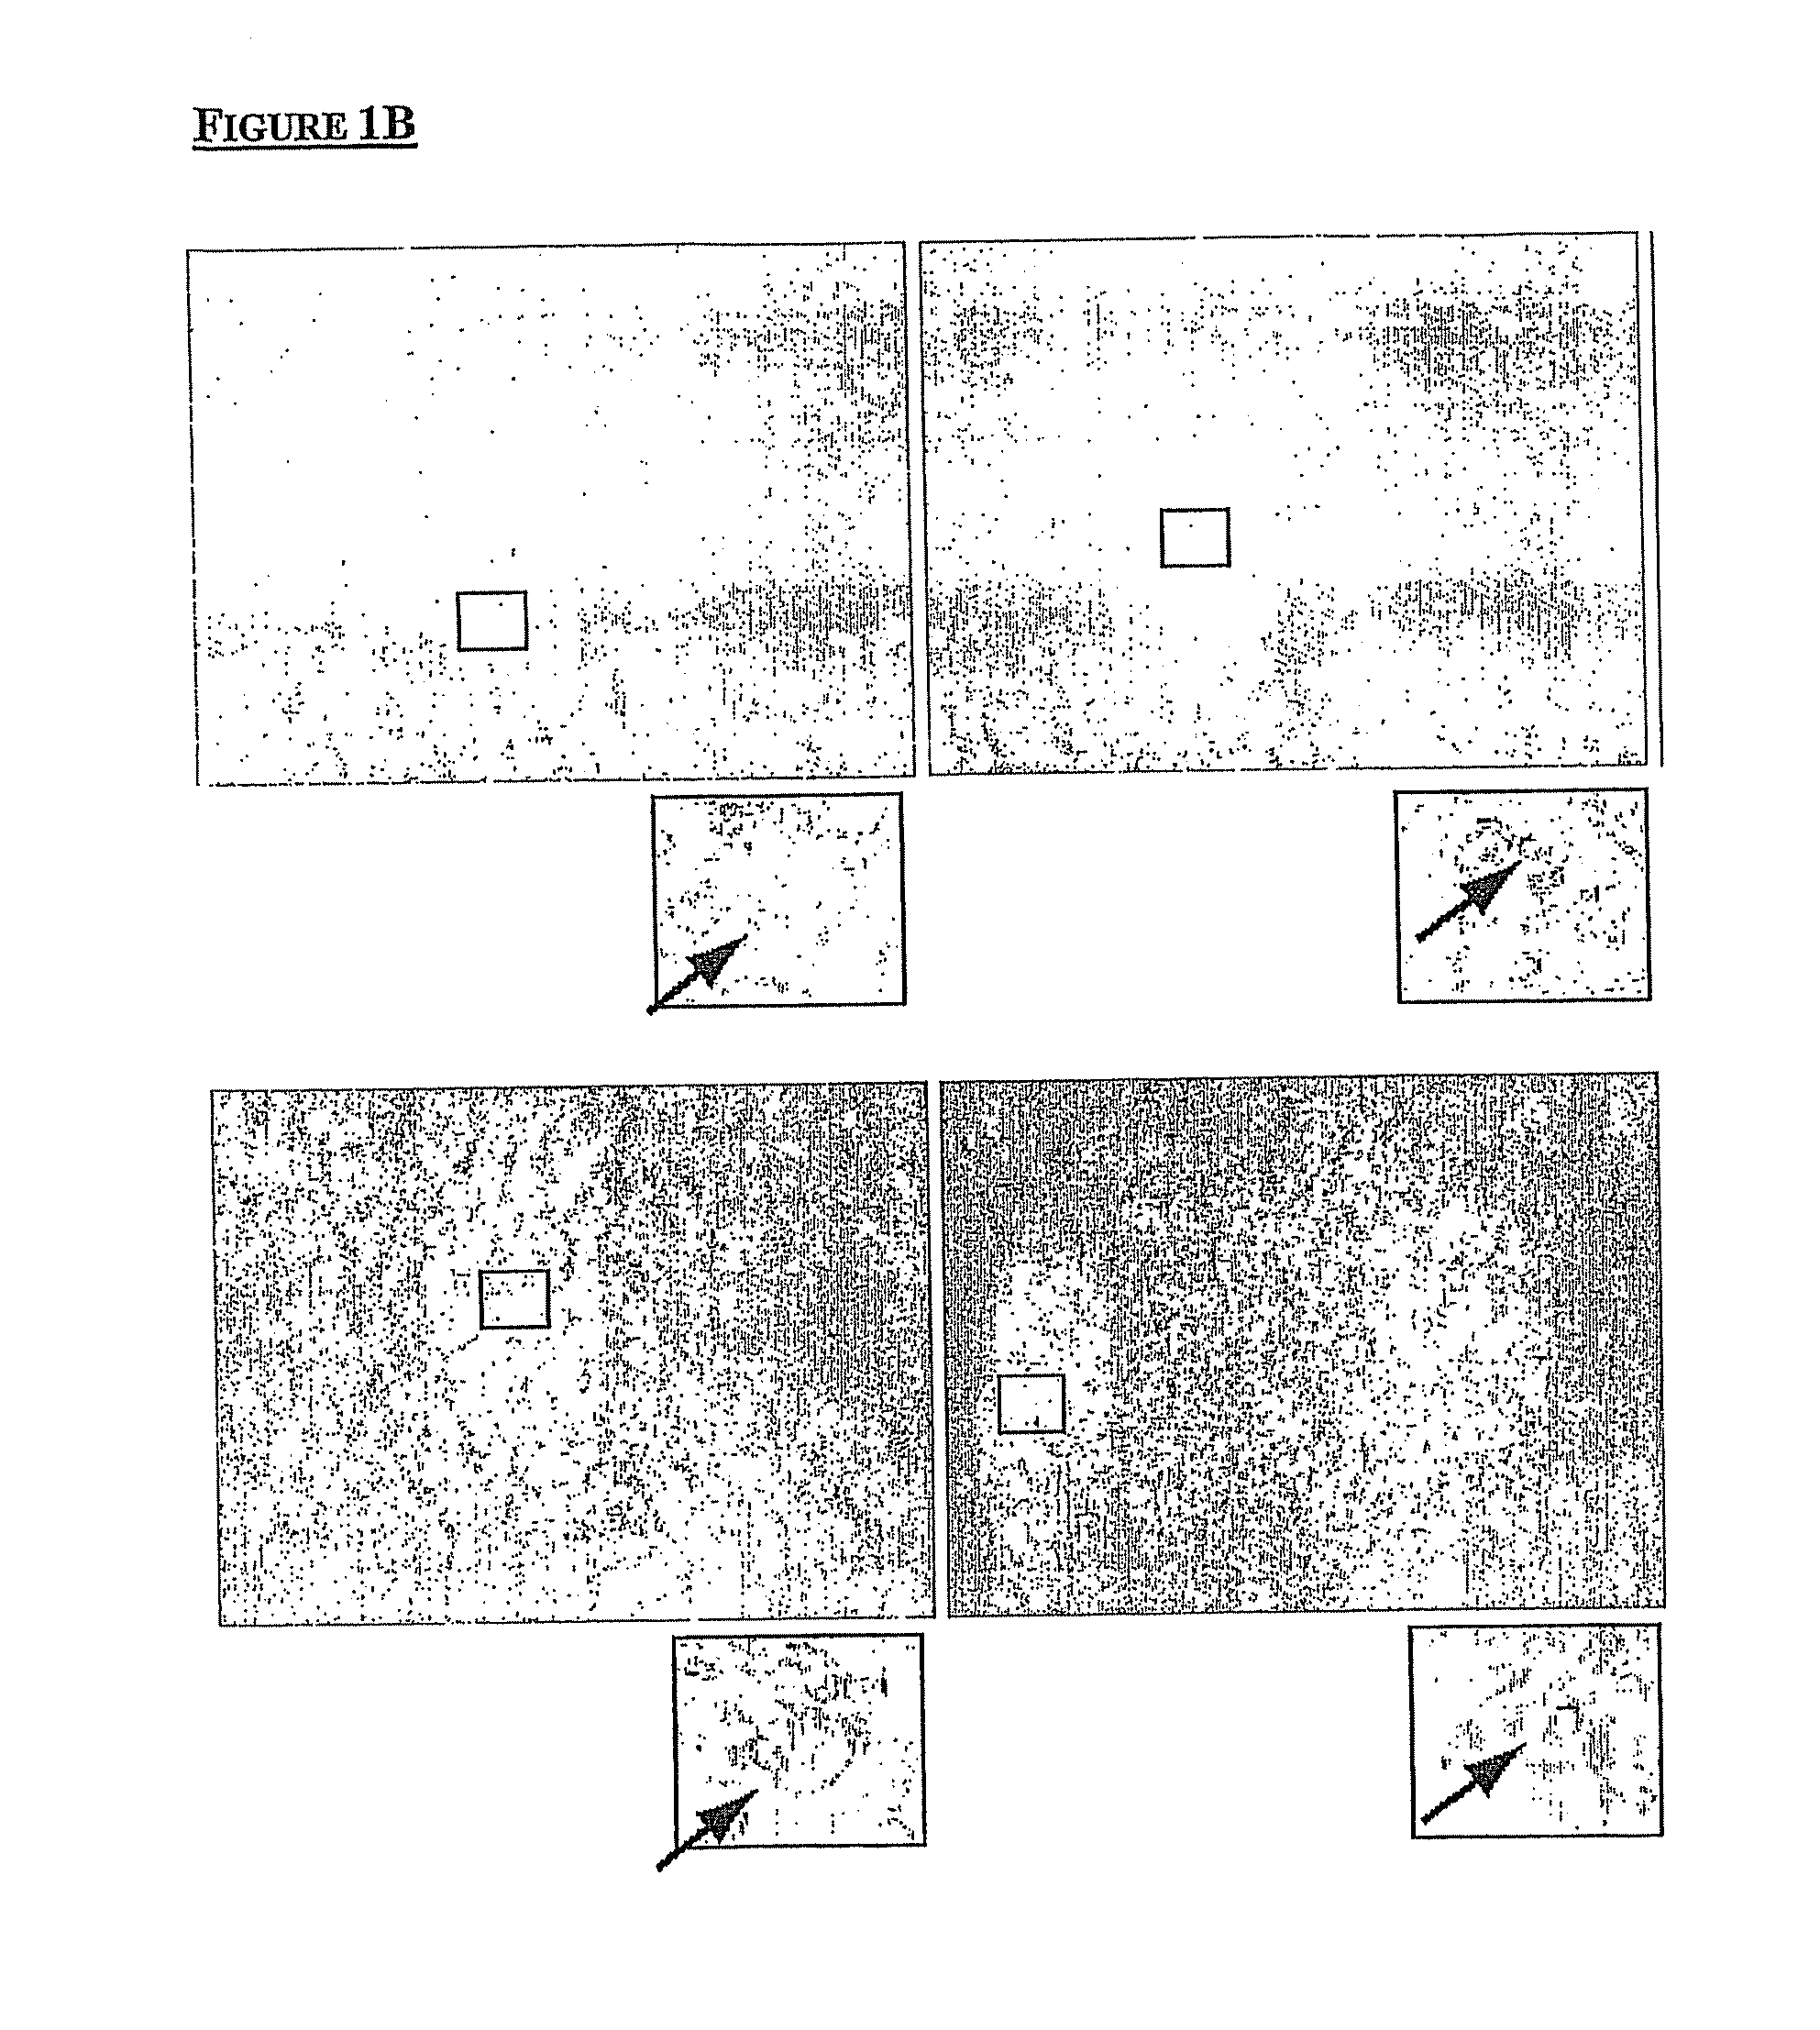 Method of deriving progenitor cell line